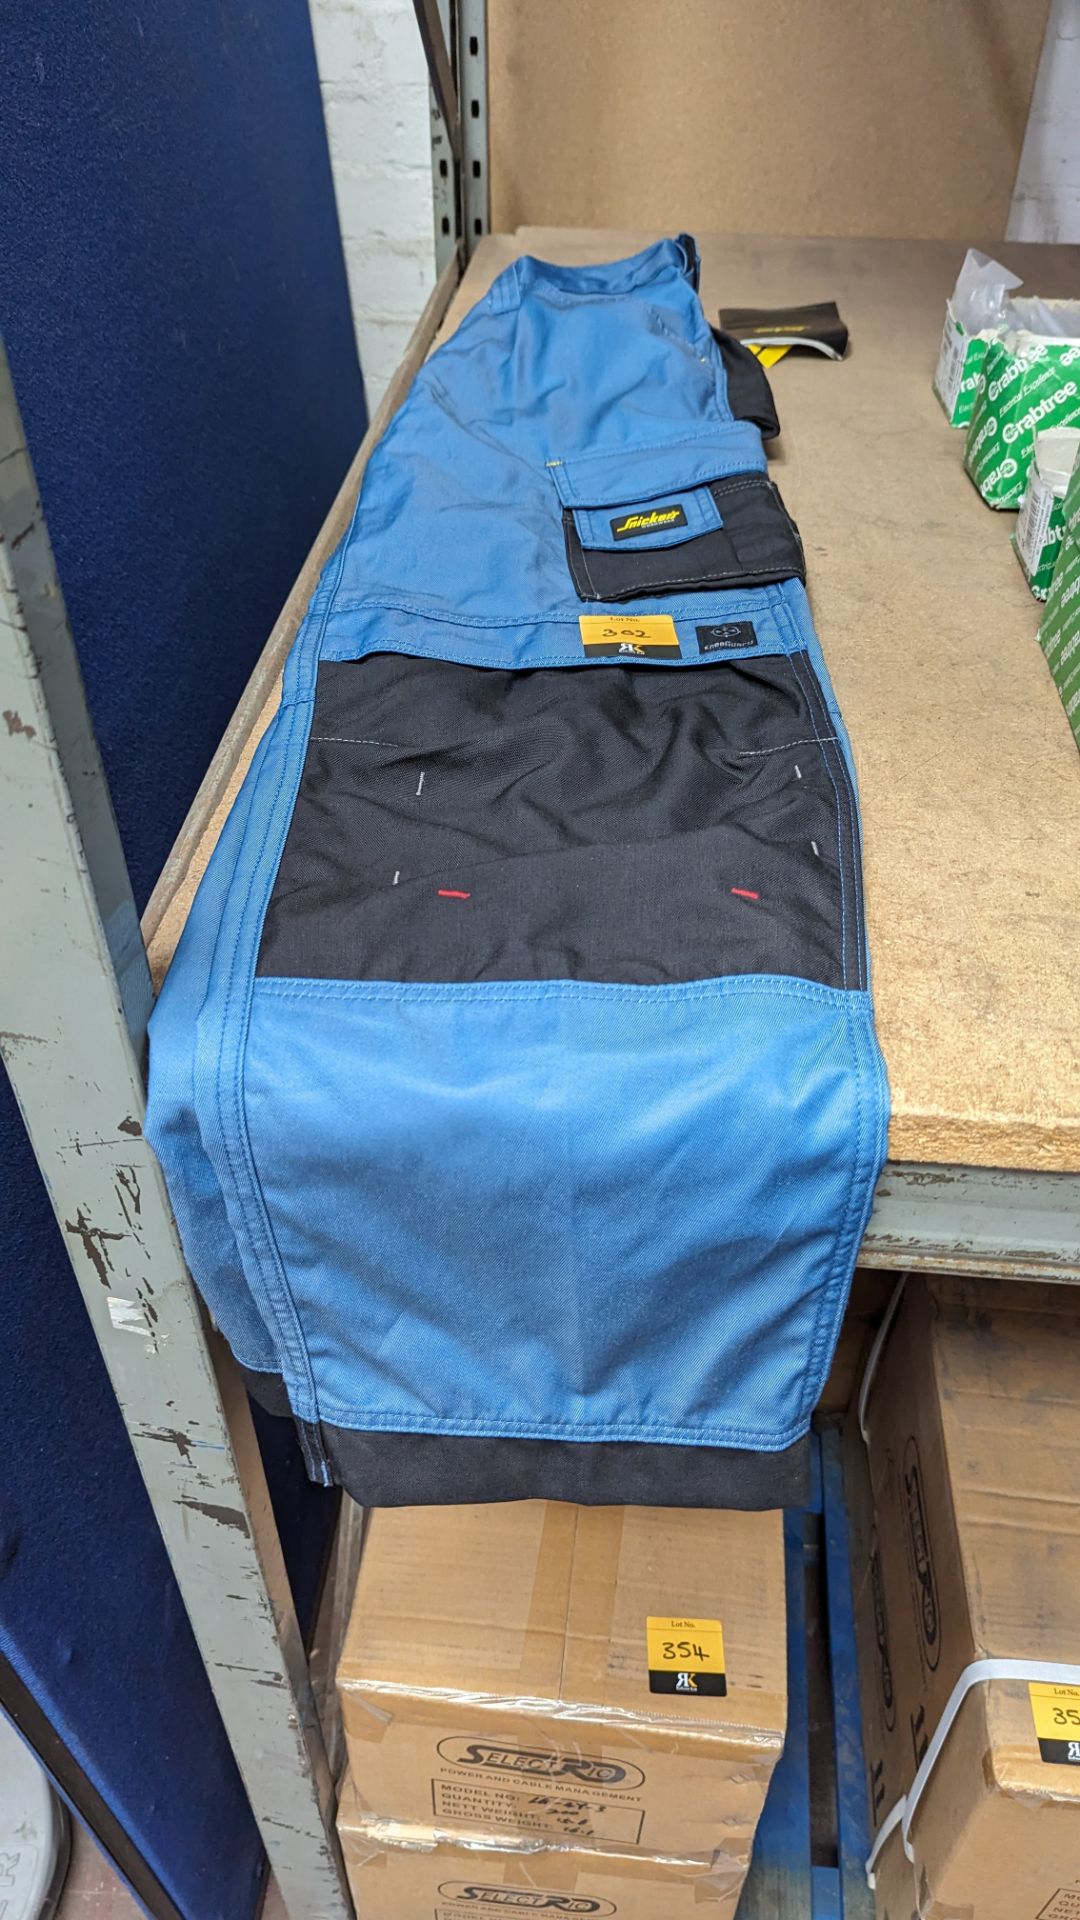 Pair of Snickers work trousers size 048, colour ocean/black 1704, craftsmen trouser dura twill